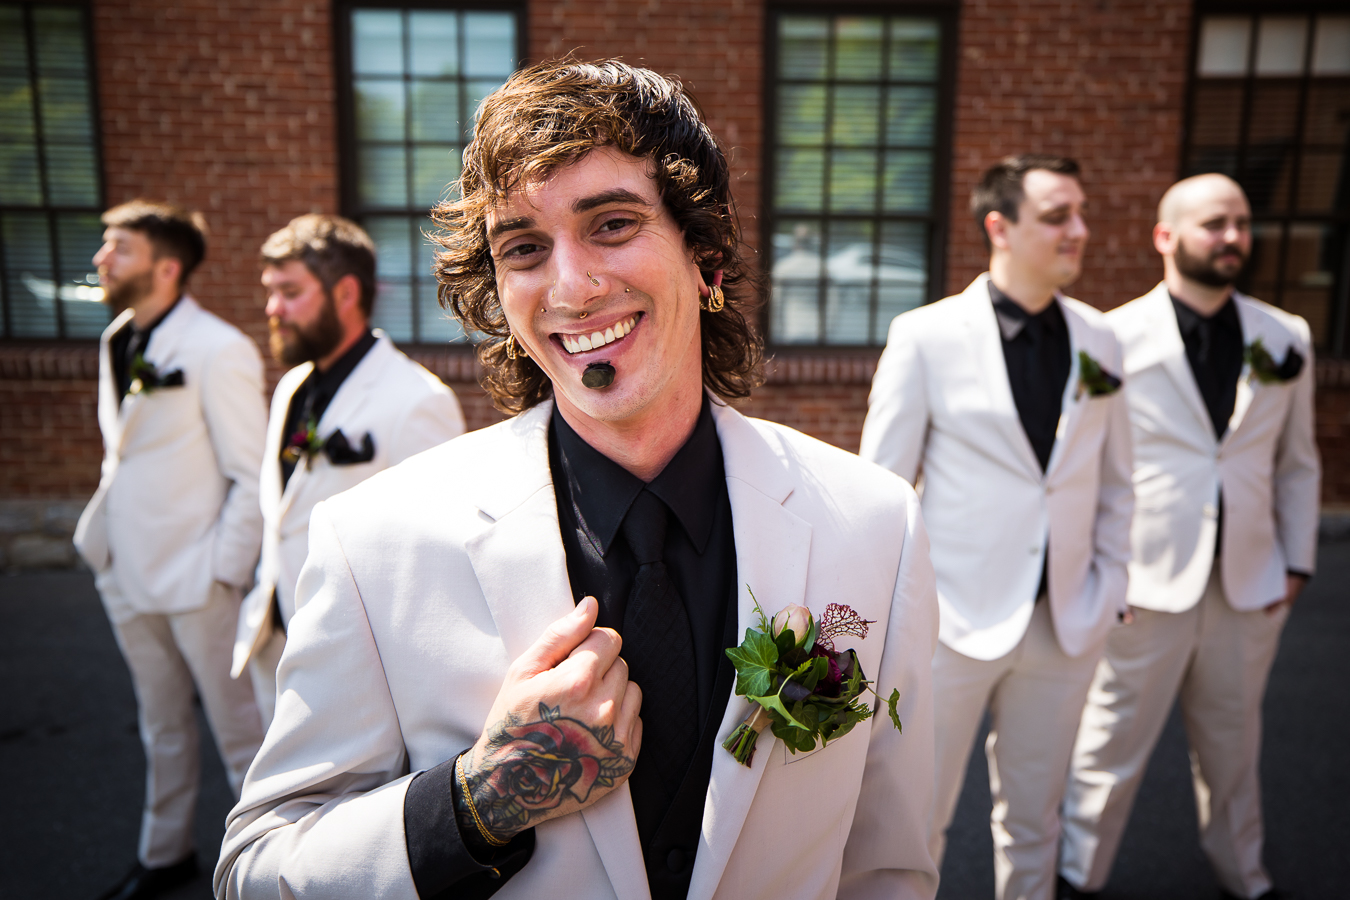 best pa wedding photographer, lisa rhinehart, captures this close up image of the groom smiling at the camera as his groomsmen stand behind him outside of the hotel 